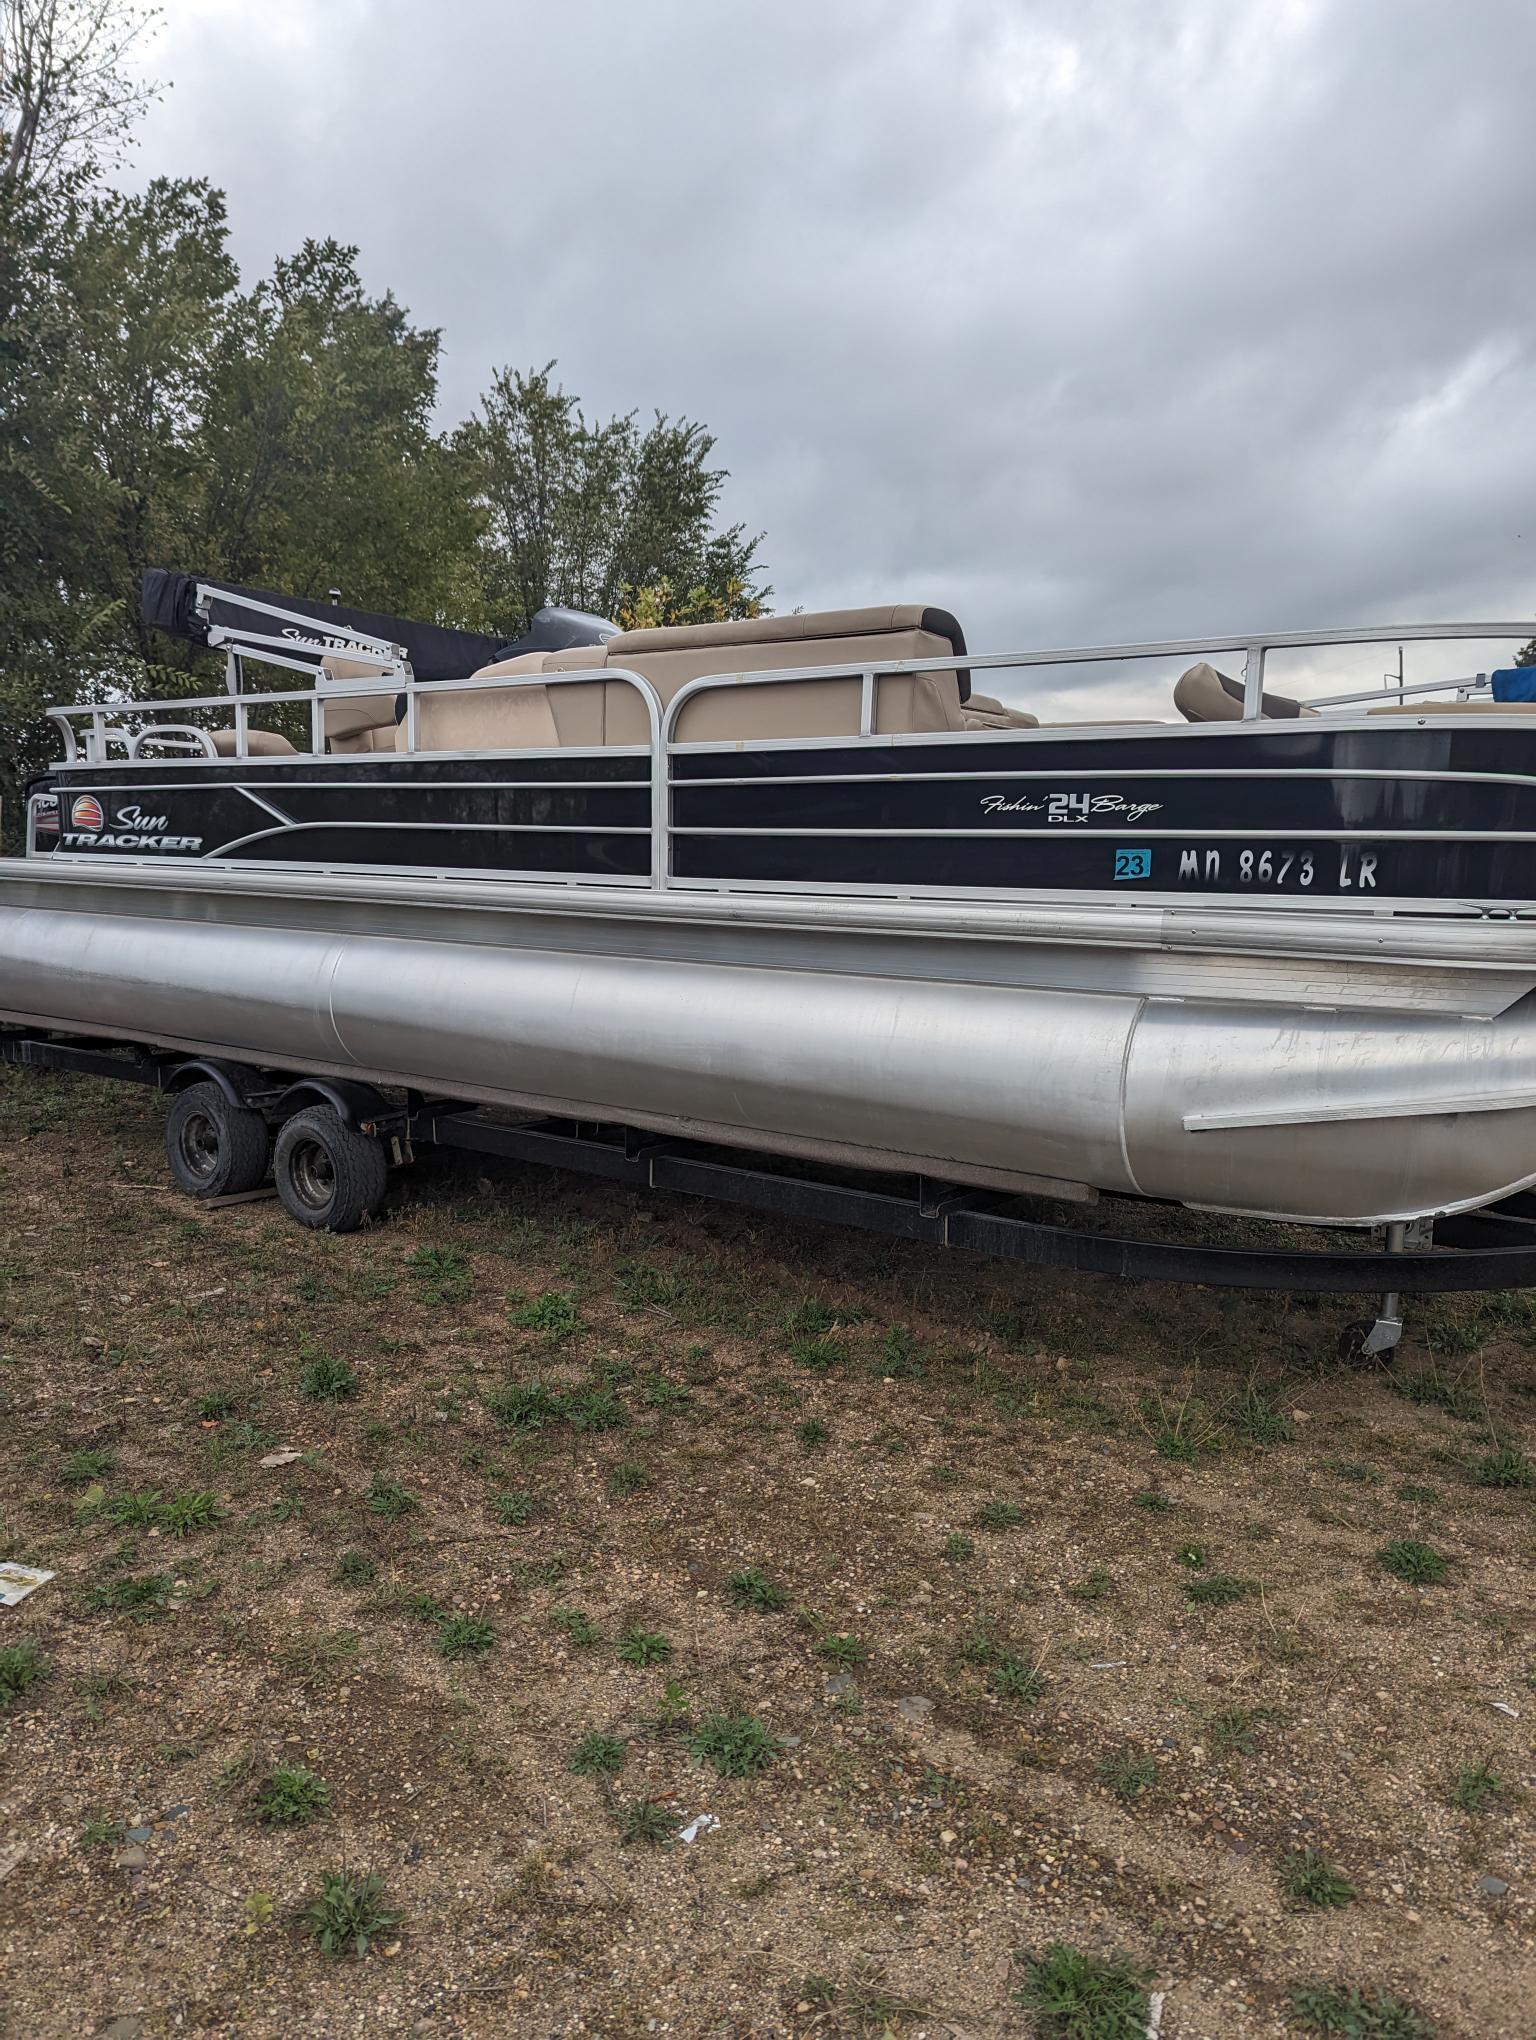 Explore Sun Tracker 21 Party Barge Boats For Sale - Boat Trader